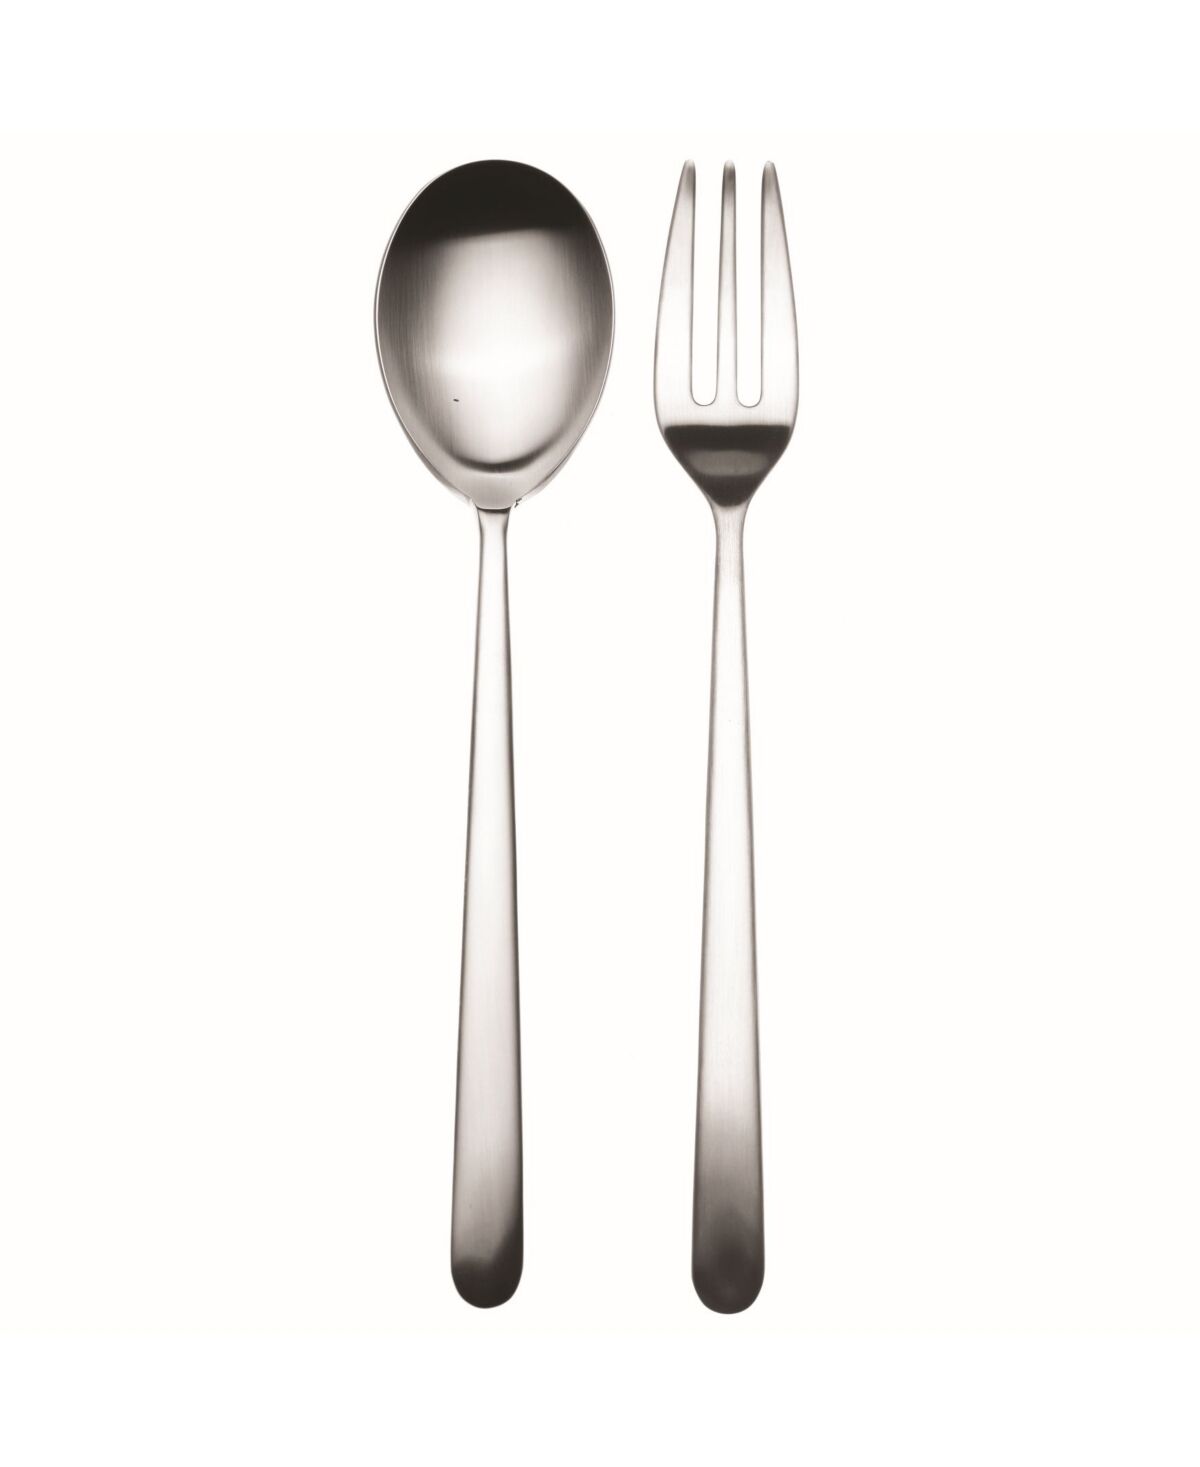 Mepra Serving Fork and Spoon Linea Cutlery, Set of 2 - Silver-Tone